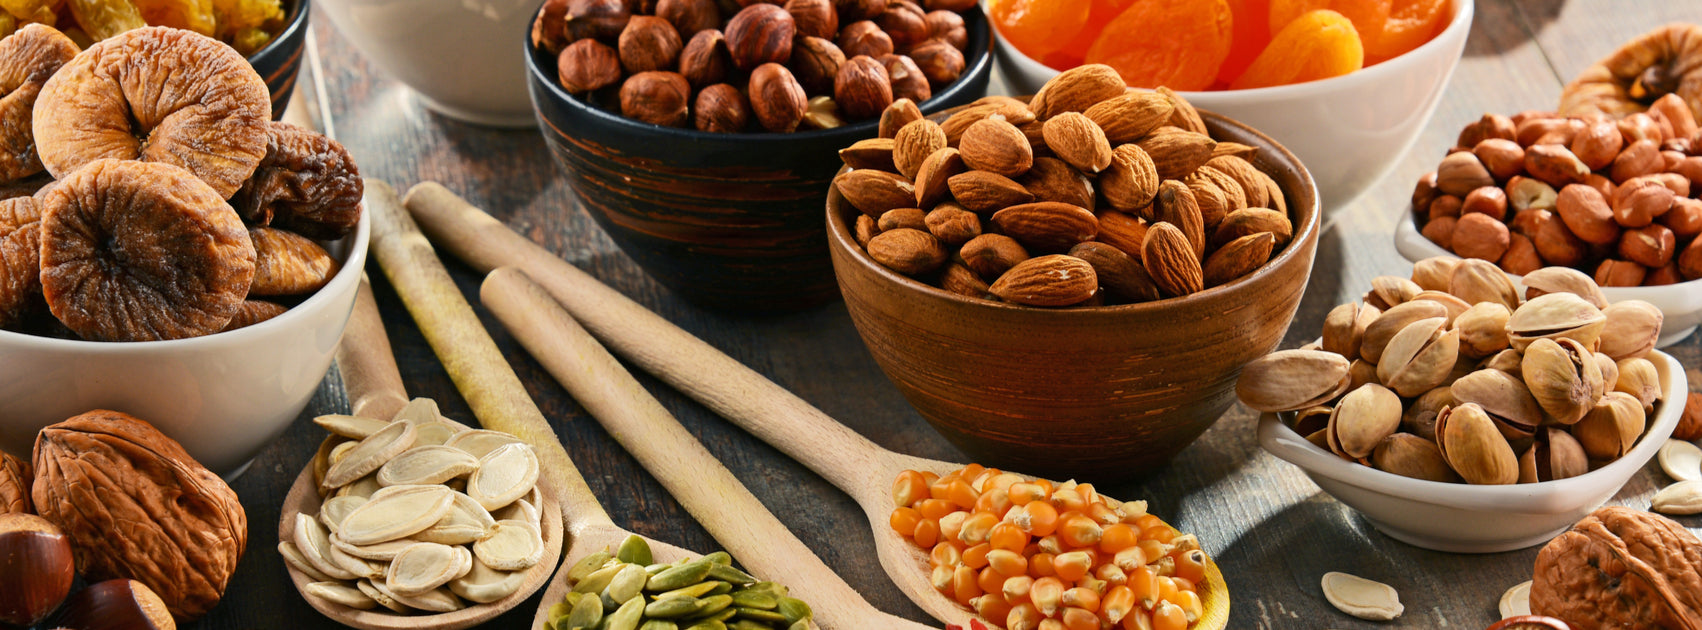 Nuts, Dried Fruits & Seeds